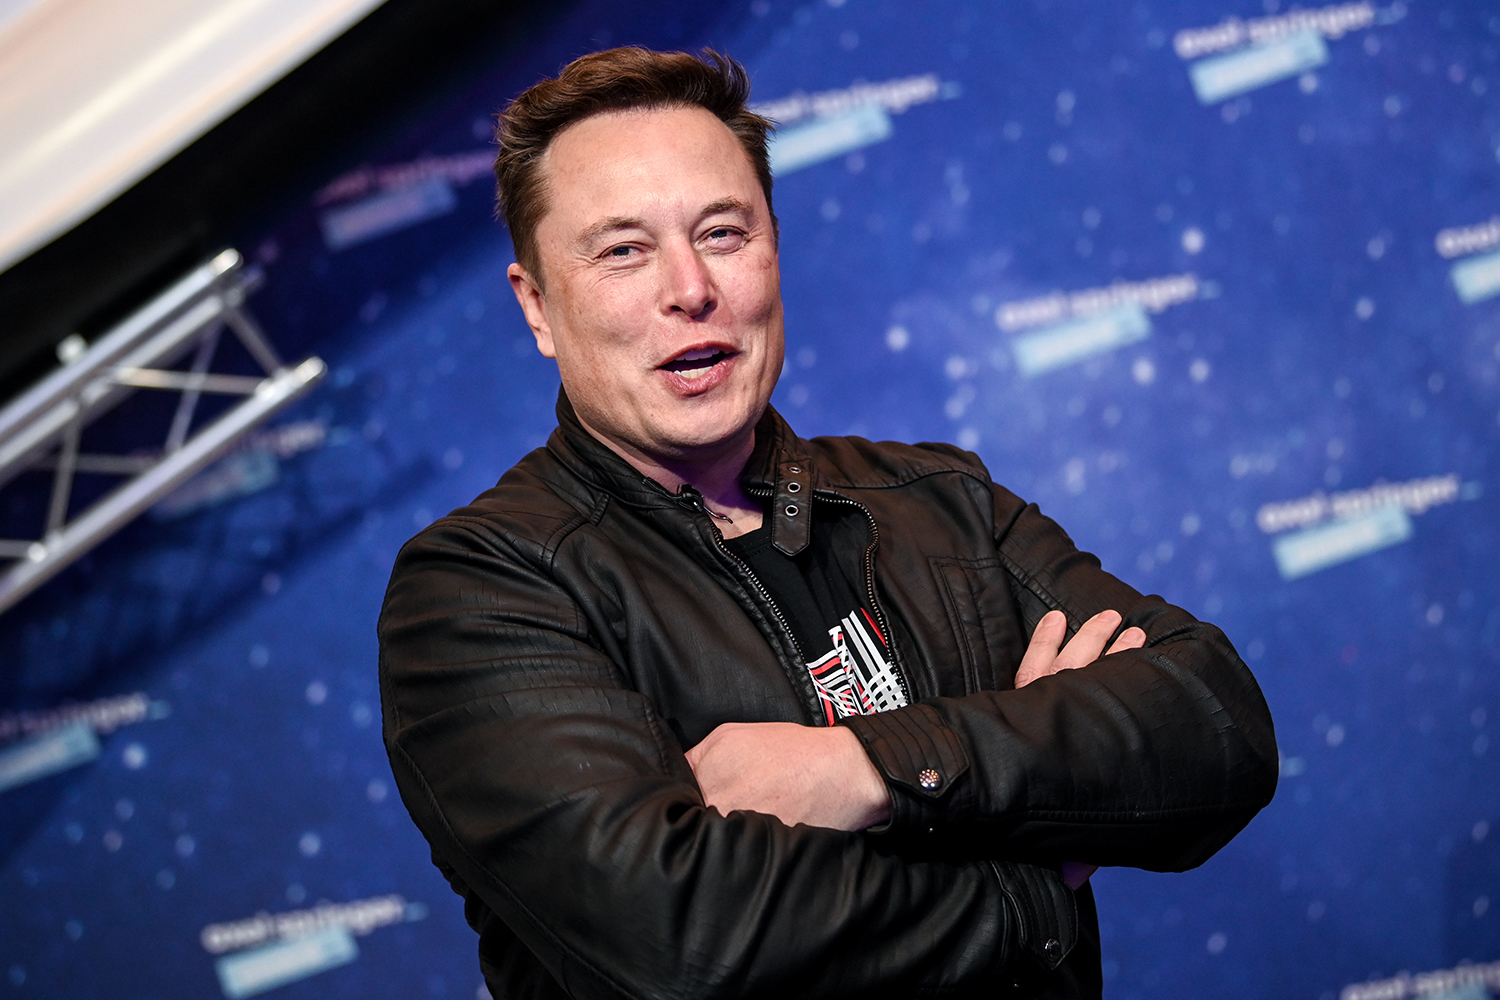 Tesla and SpaceX CEO Elon Musk smiles and folds his arms